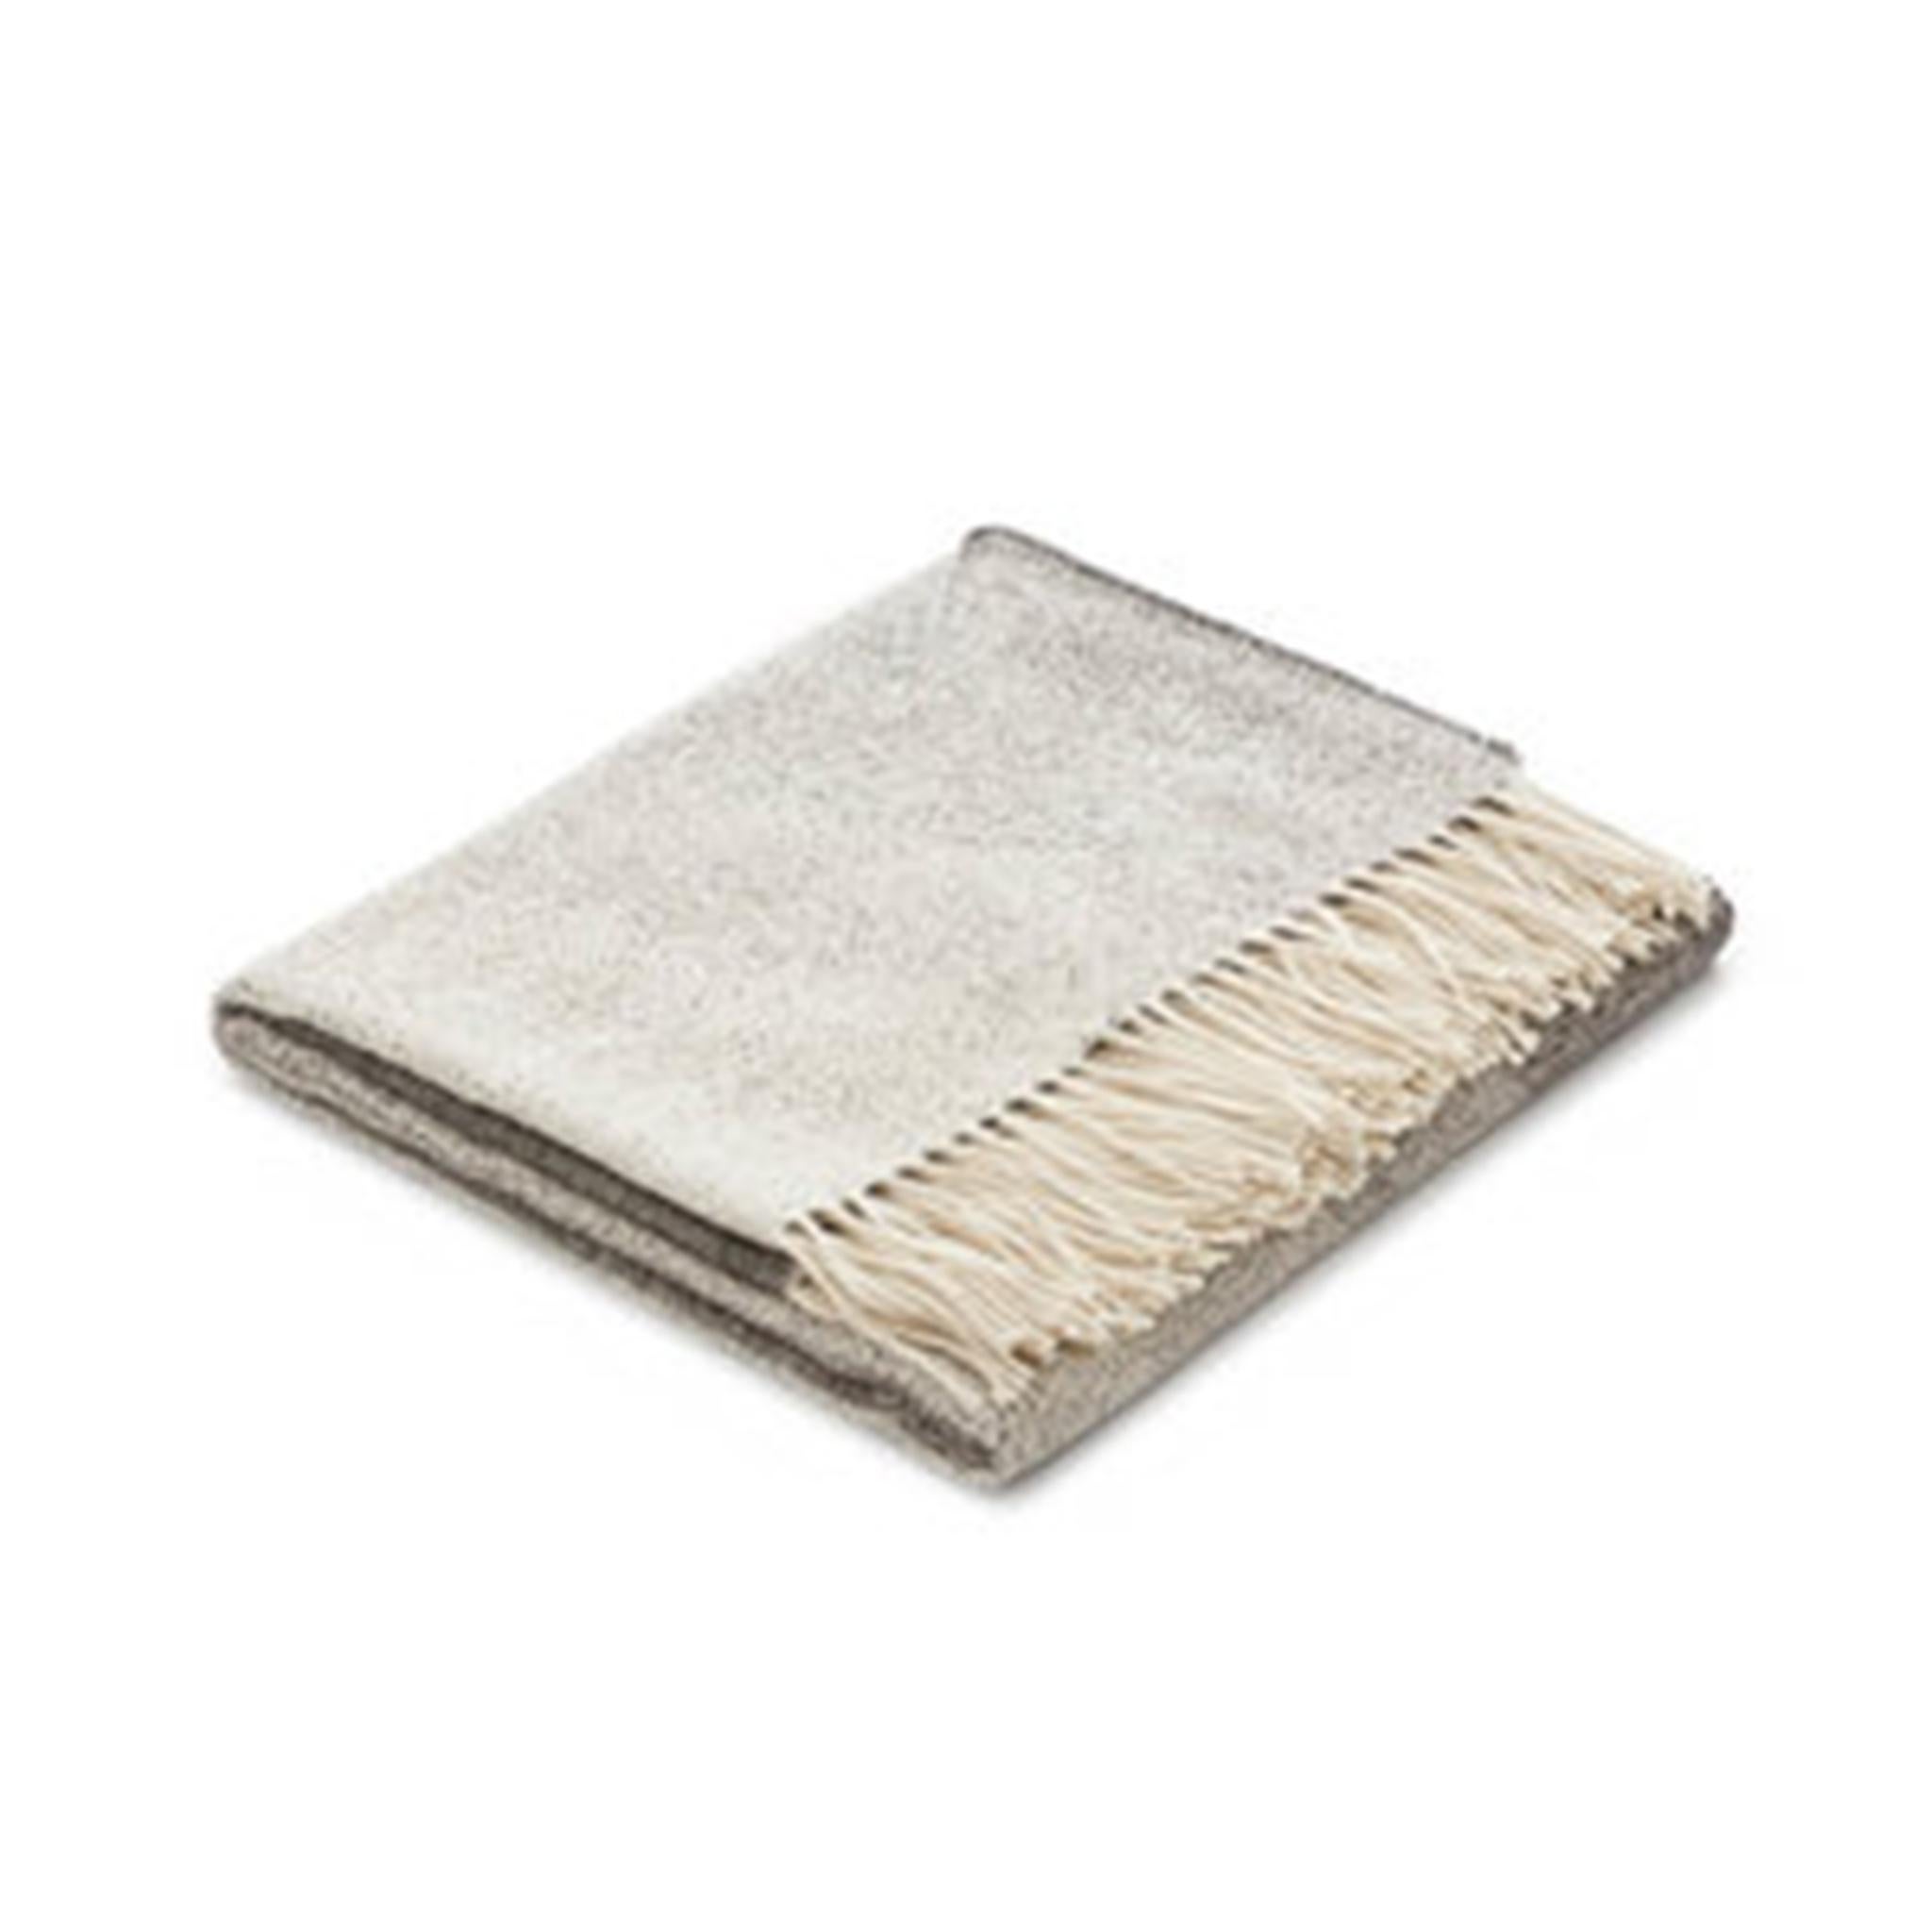 Modern Luft Throw 100% Baby Alpaca by Fells Andes For Sale